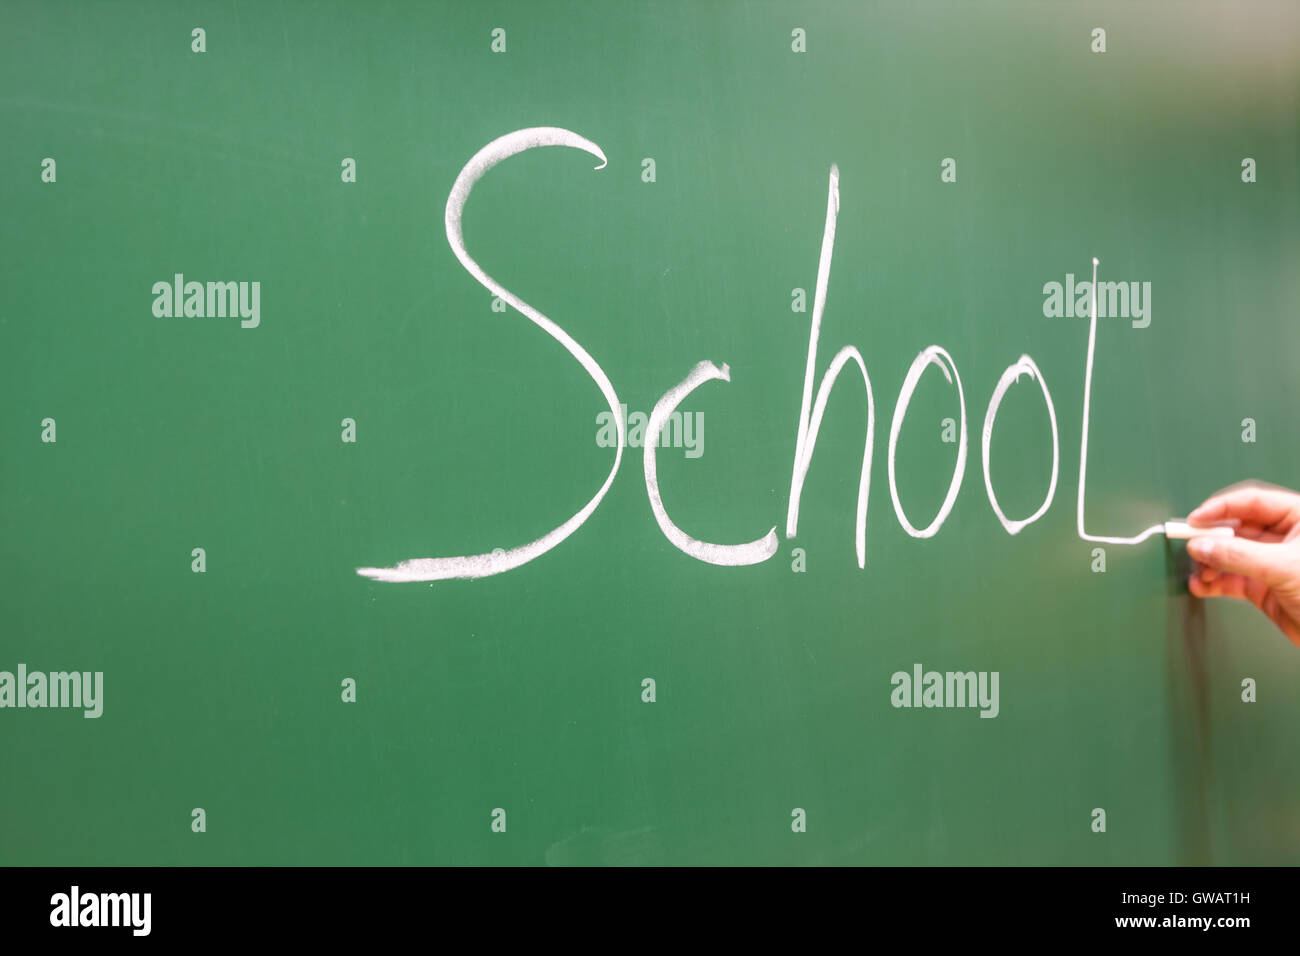 in the class, there is a word school on a drawing board Stock Photo